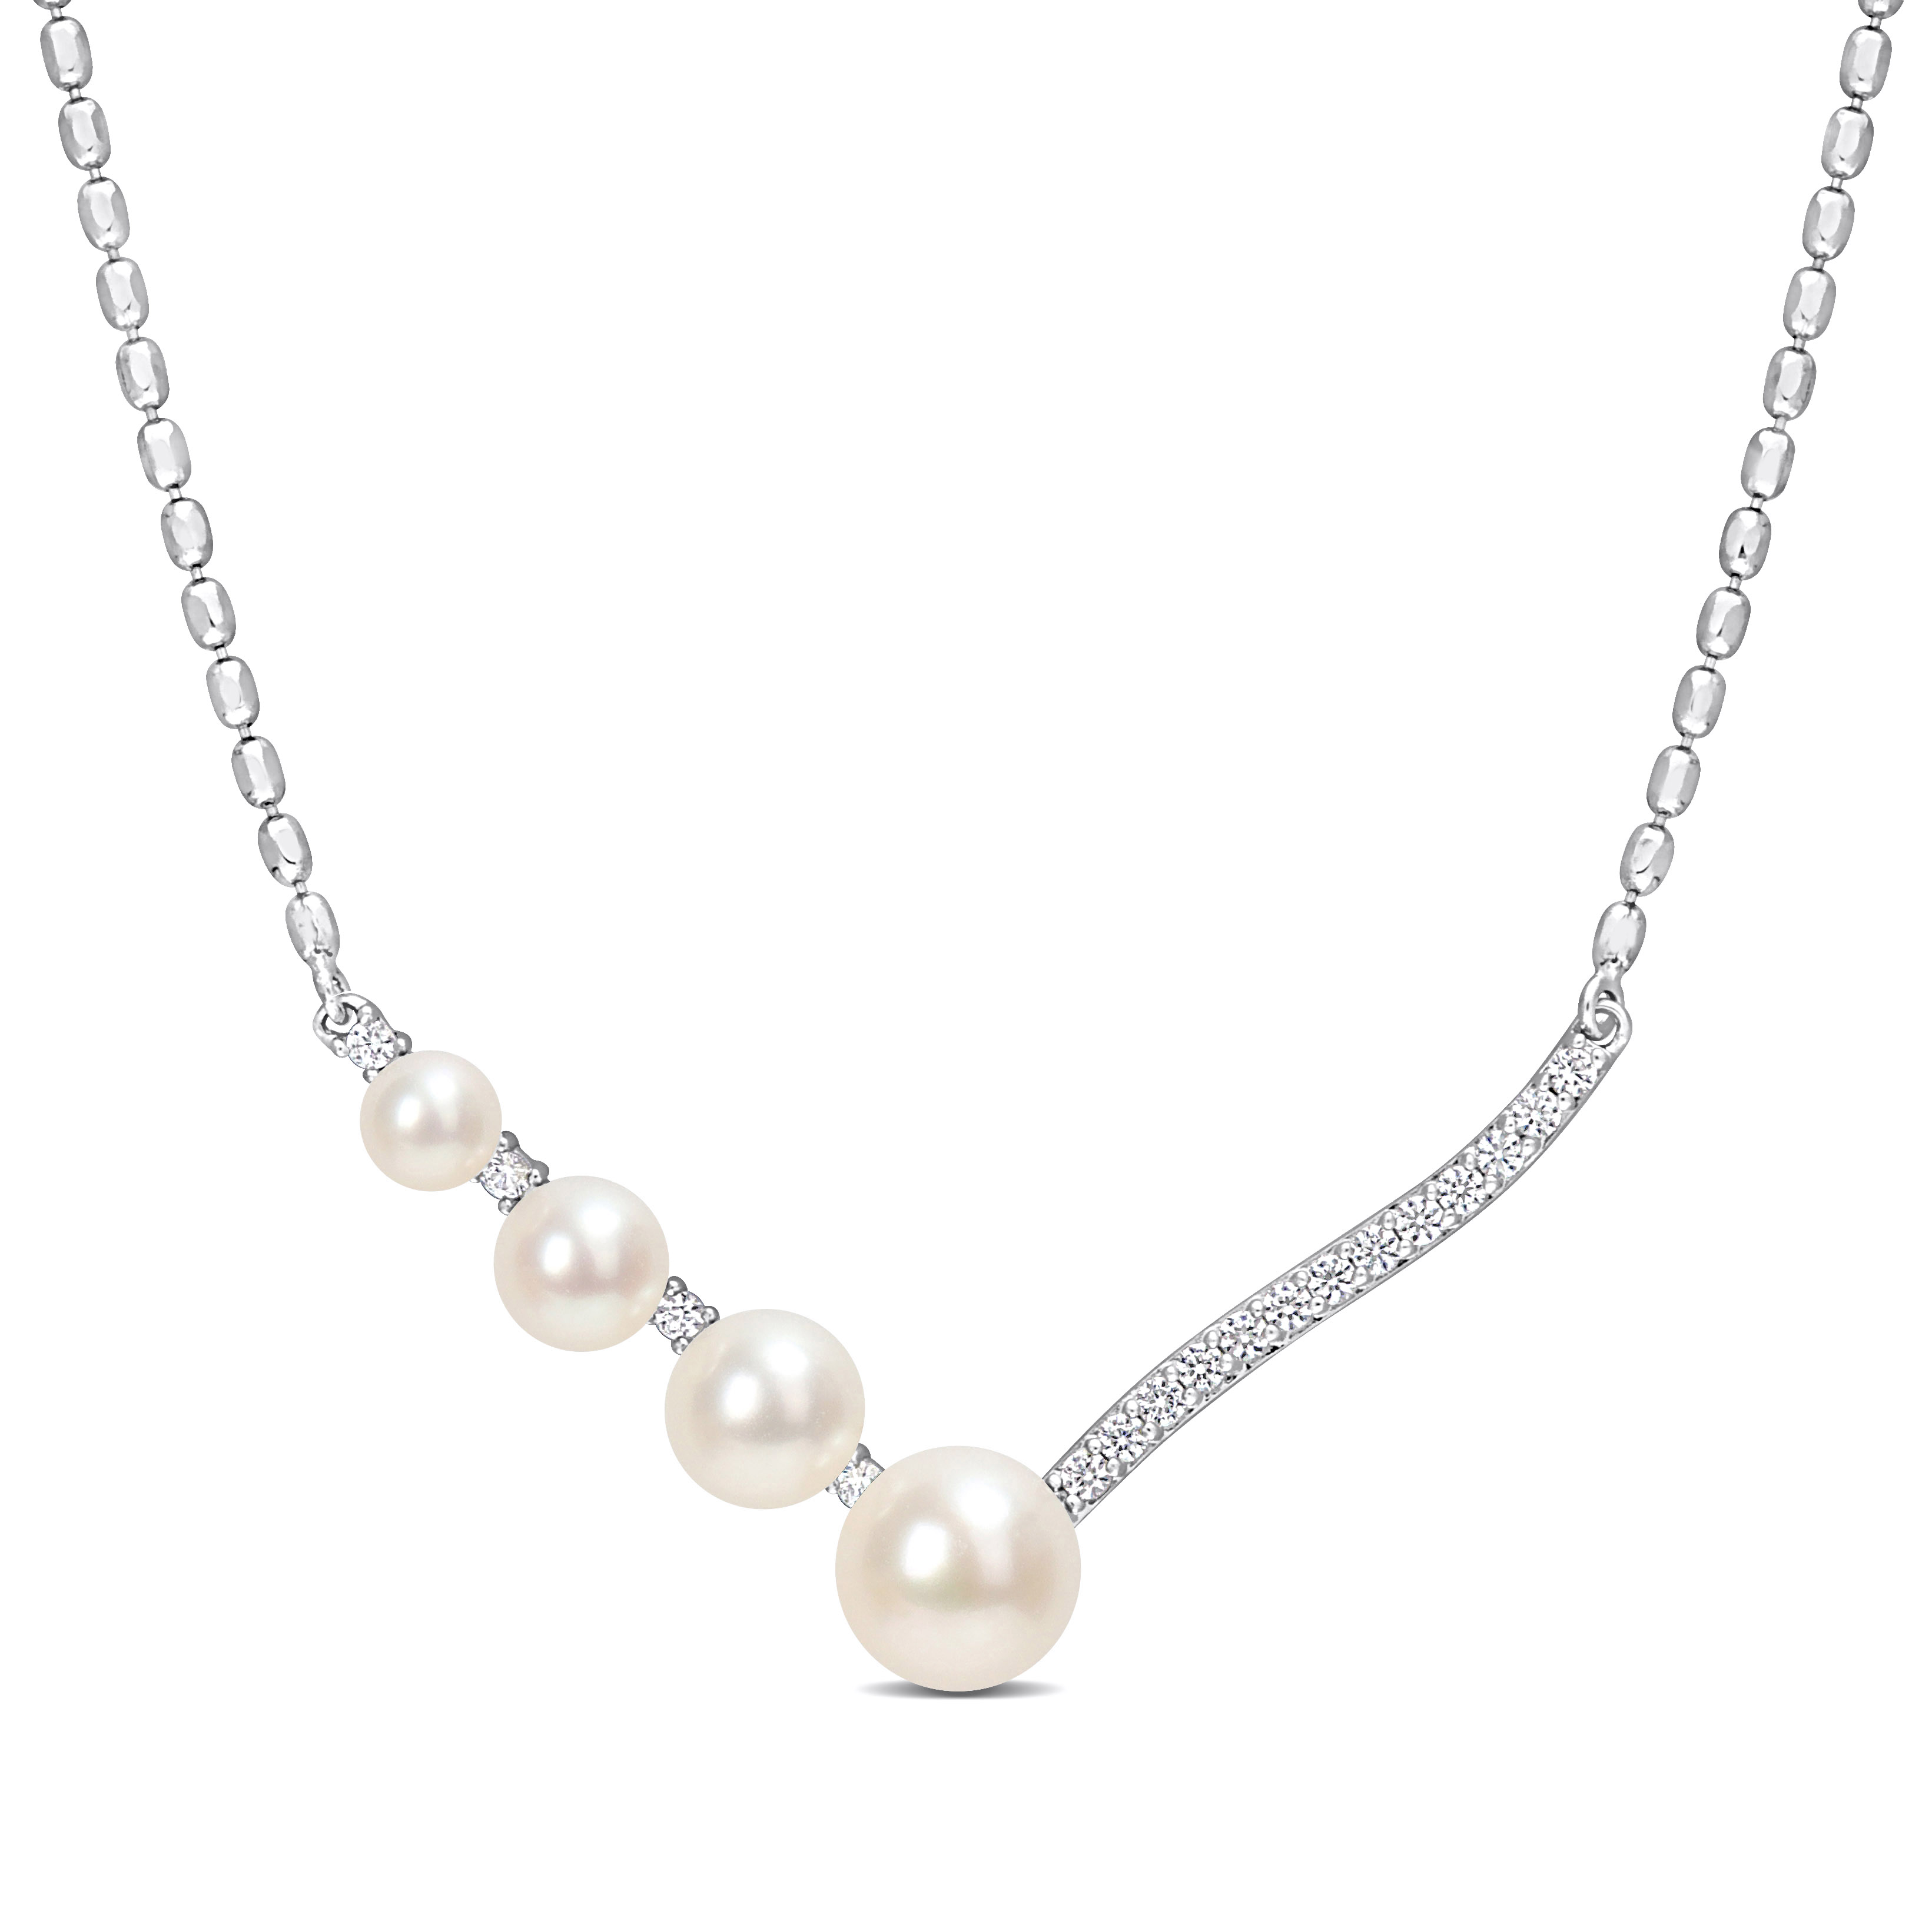 Kuama Necklace - Pear White Sapphire Necklace - Do Amore